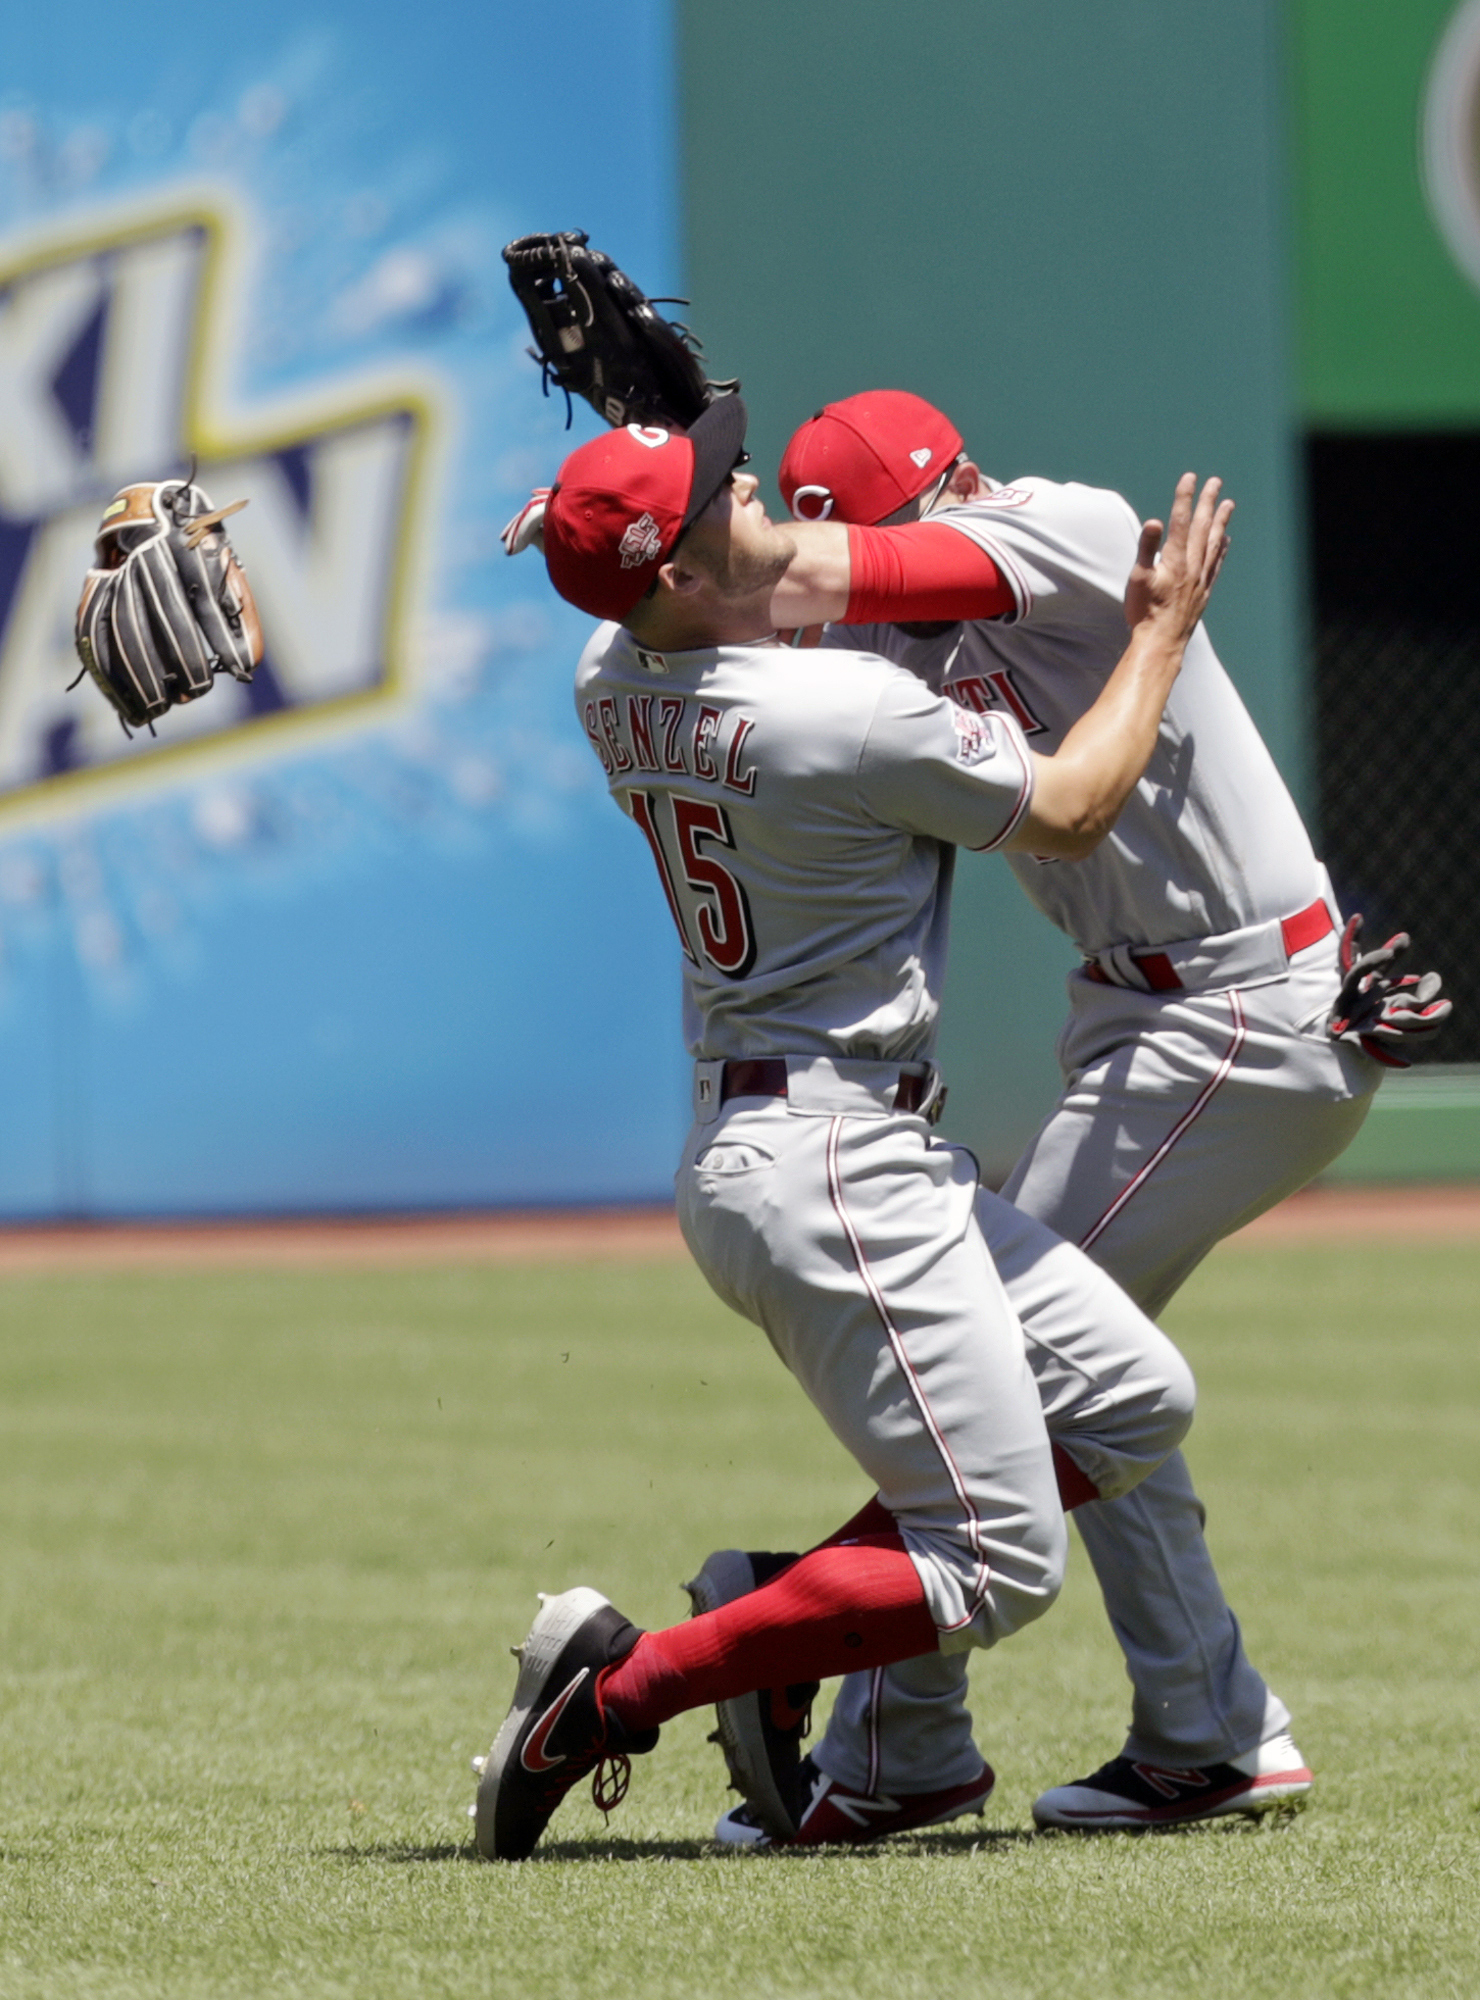 Reds open game with 2 homers, beat Indians 7-2, split series